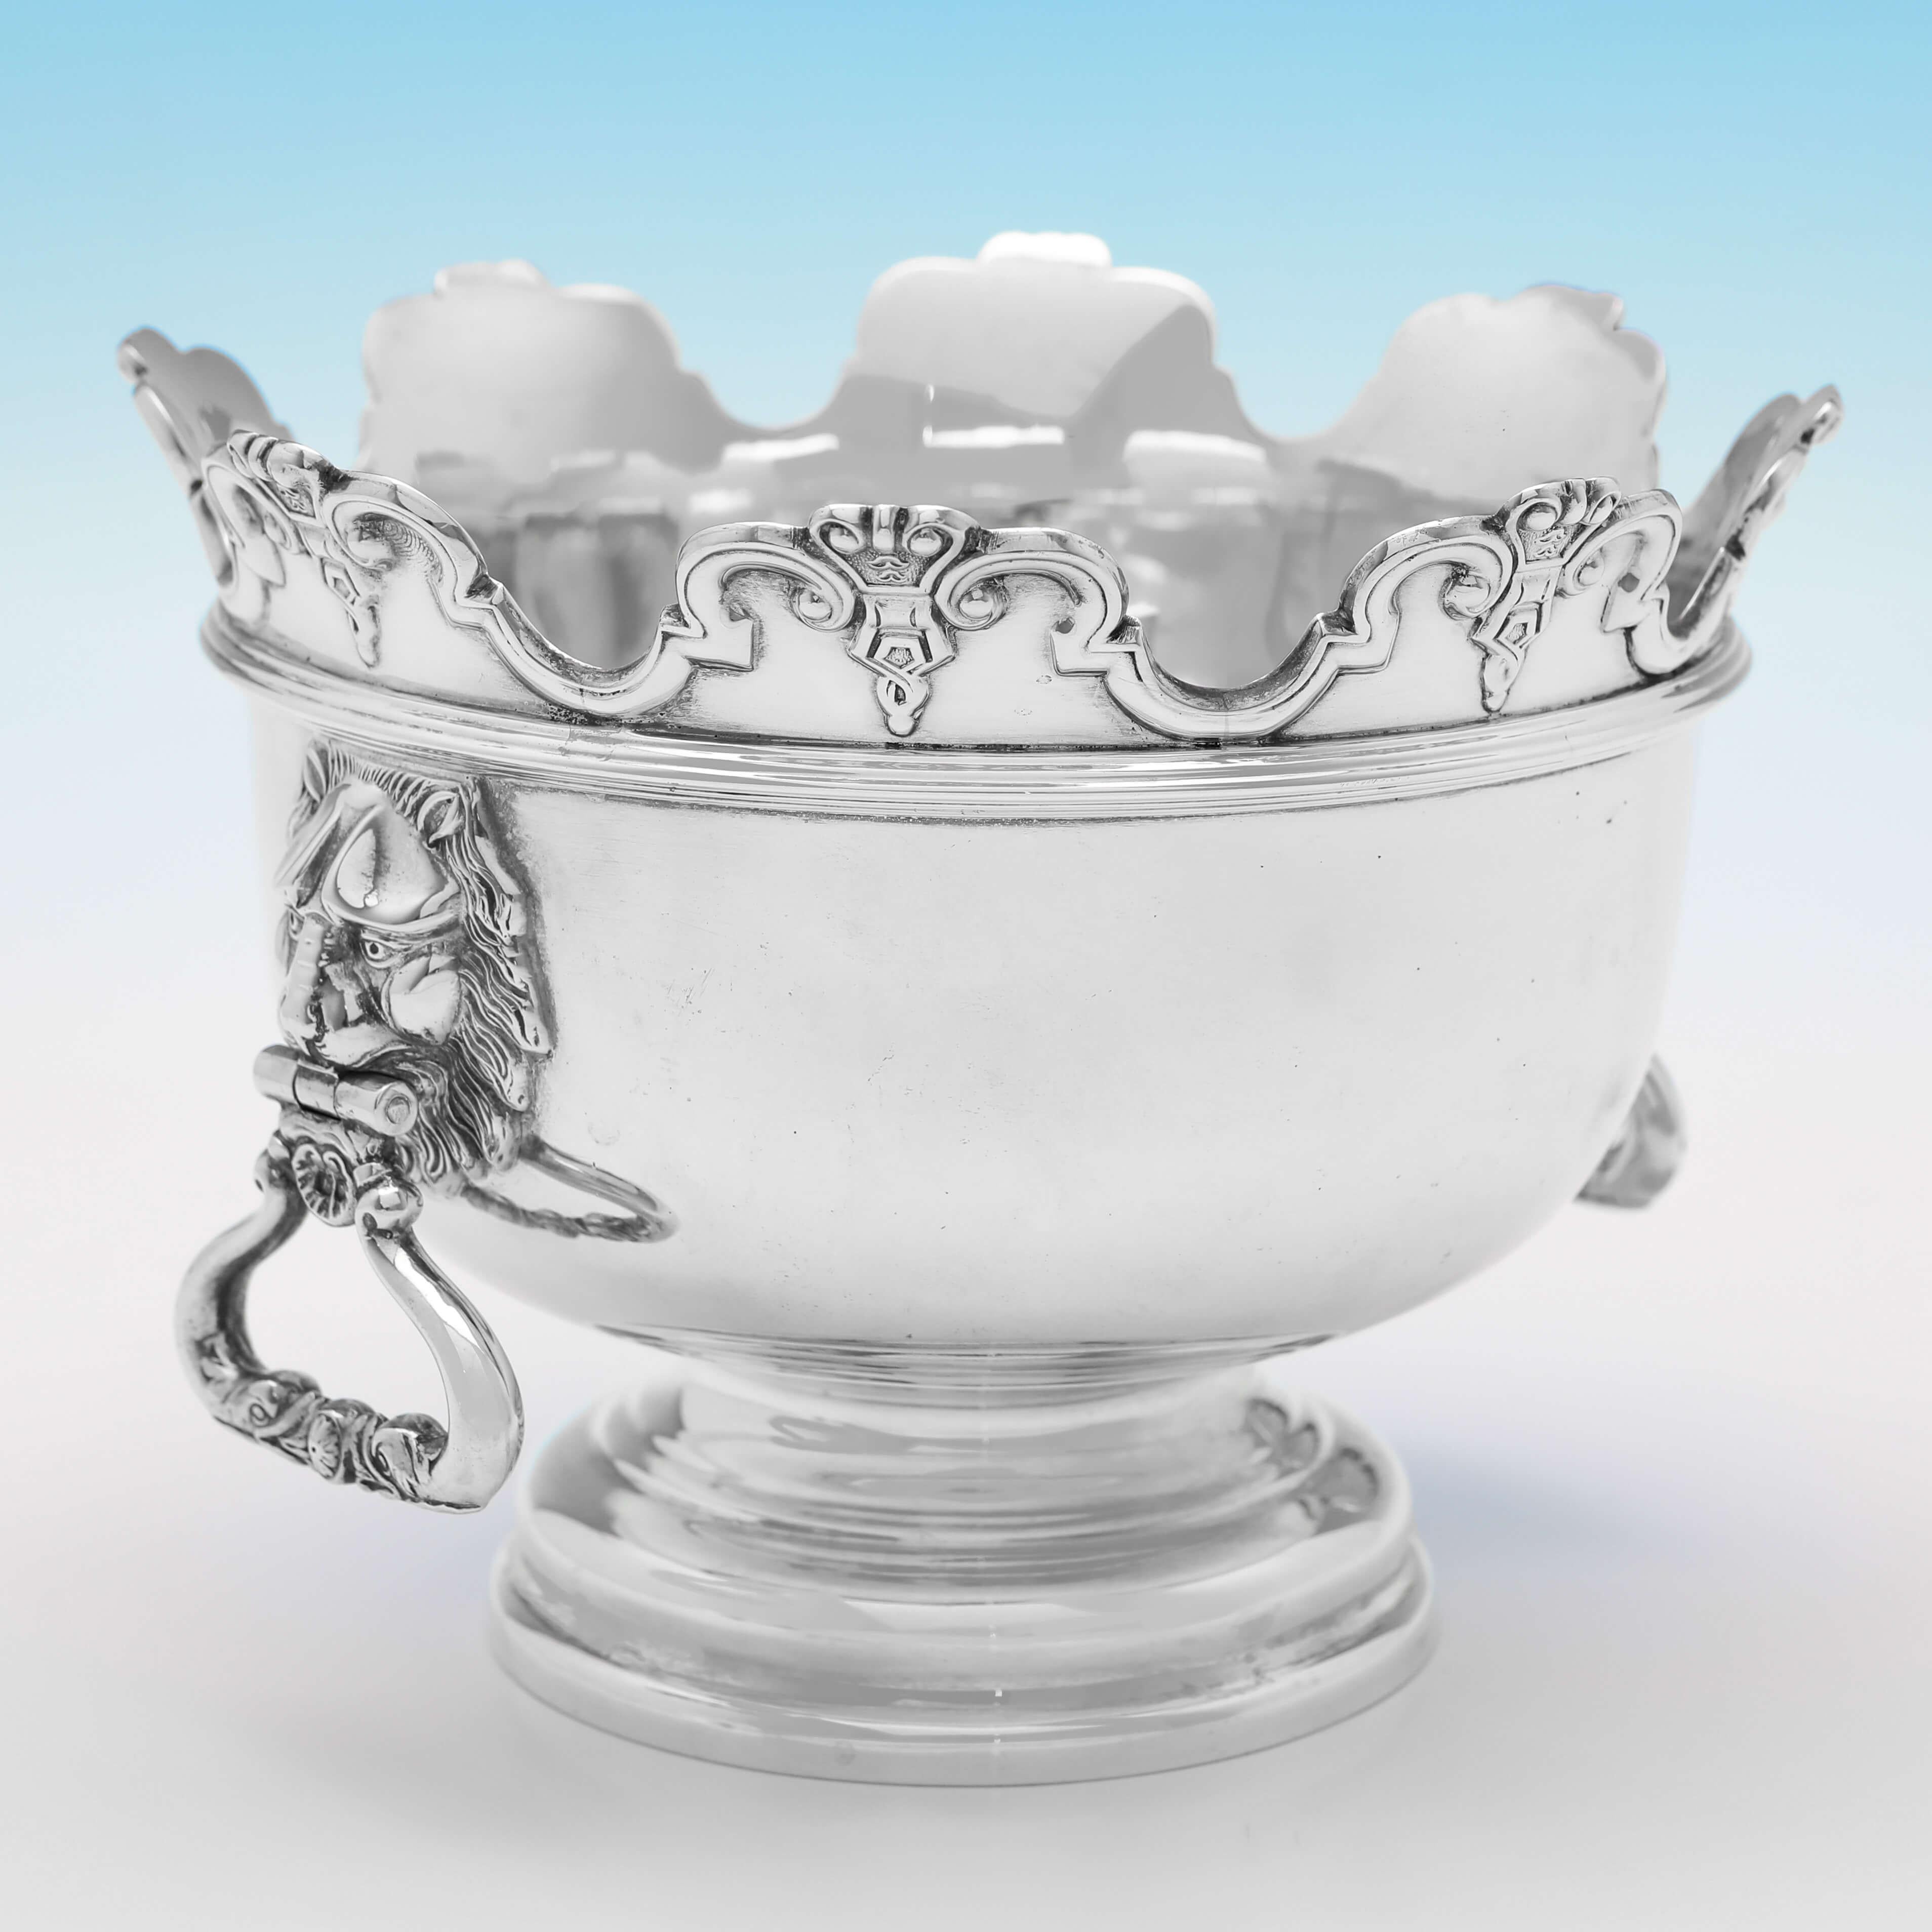 Hallmarked in London in 1905 by Hawksworth Eyres & Co., this charming, Edwardian, Antique Sterling Silver Bowl, is based on the 'Monteith' style. The bowl stands on a reed detailed pedestal base and features a decorative shaped edge, and lion mask